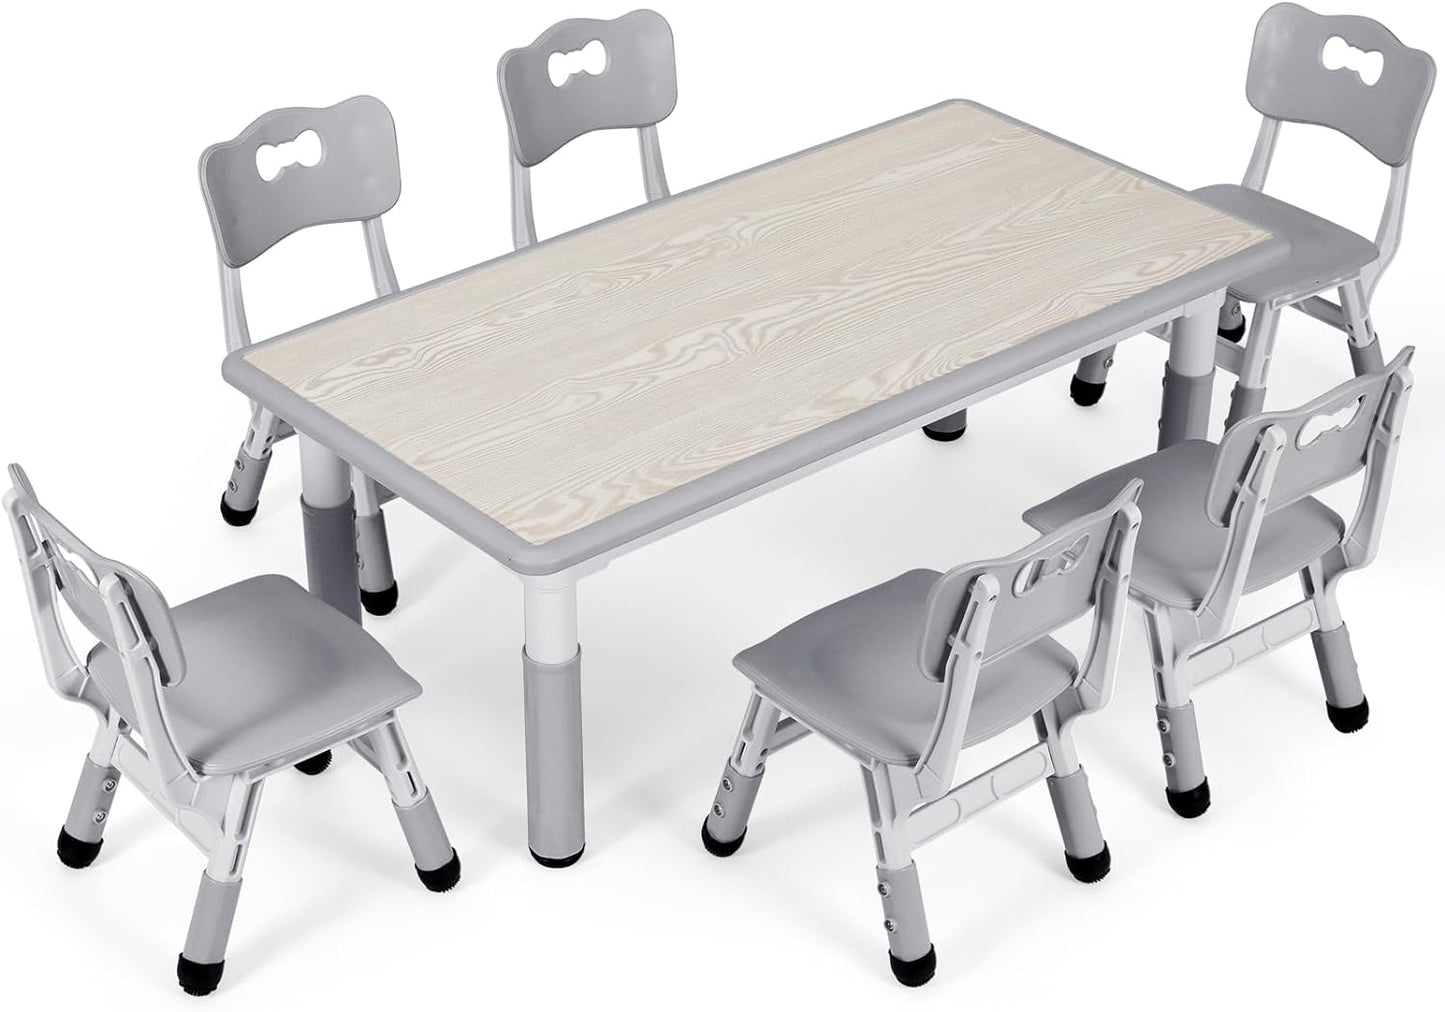 Arlopu Kids Study Table and 6 Chairs Set, Height Adjustable Graffiti Table, Preschool Activity Art Craft Table for 6, Multifunctional Toddler Table for Reading, Drawing